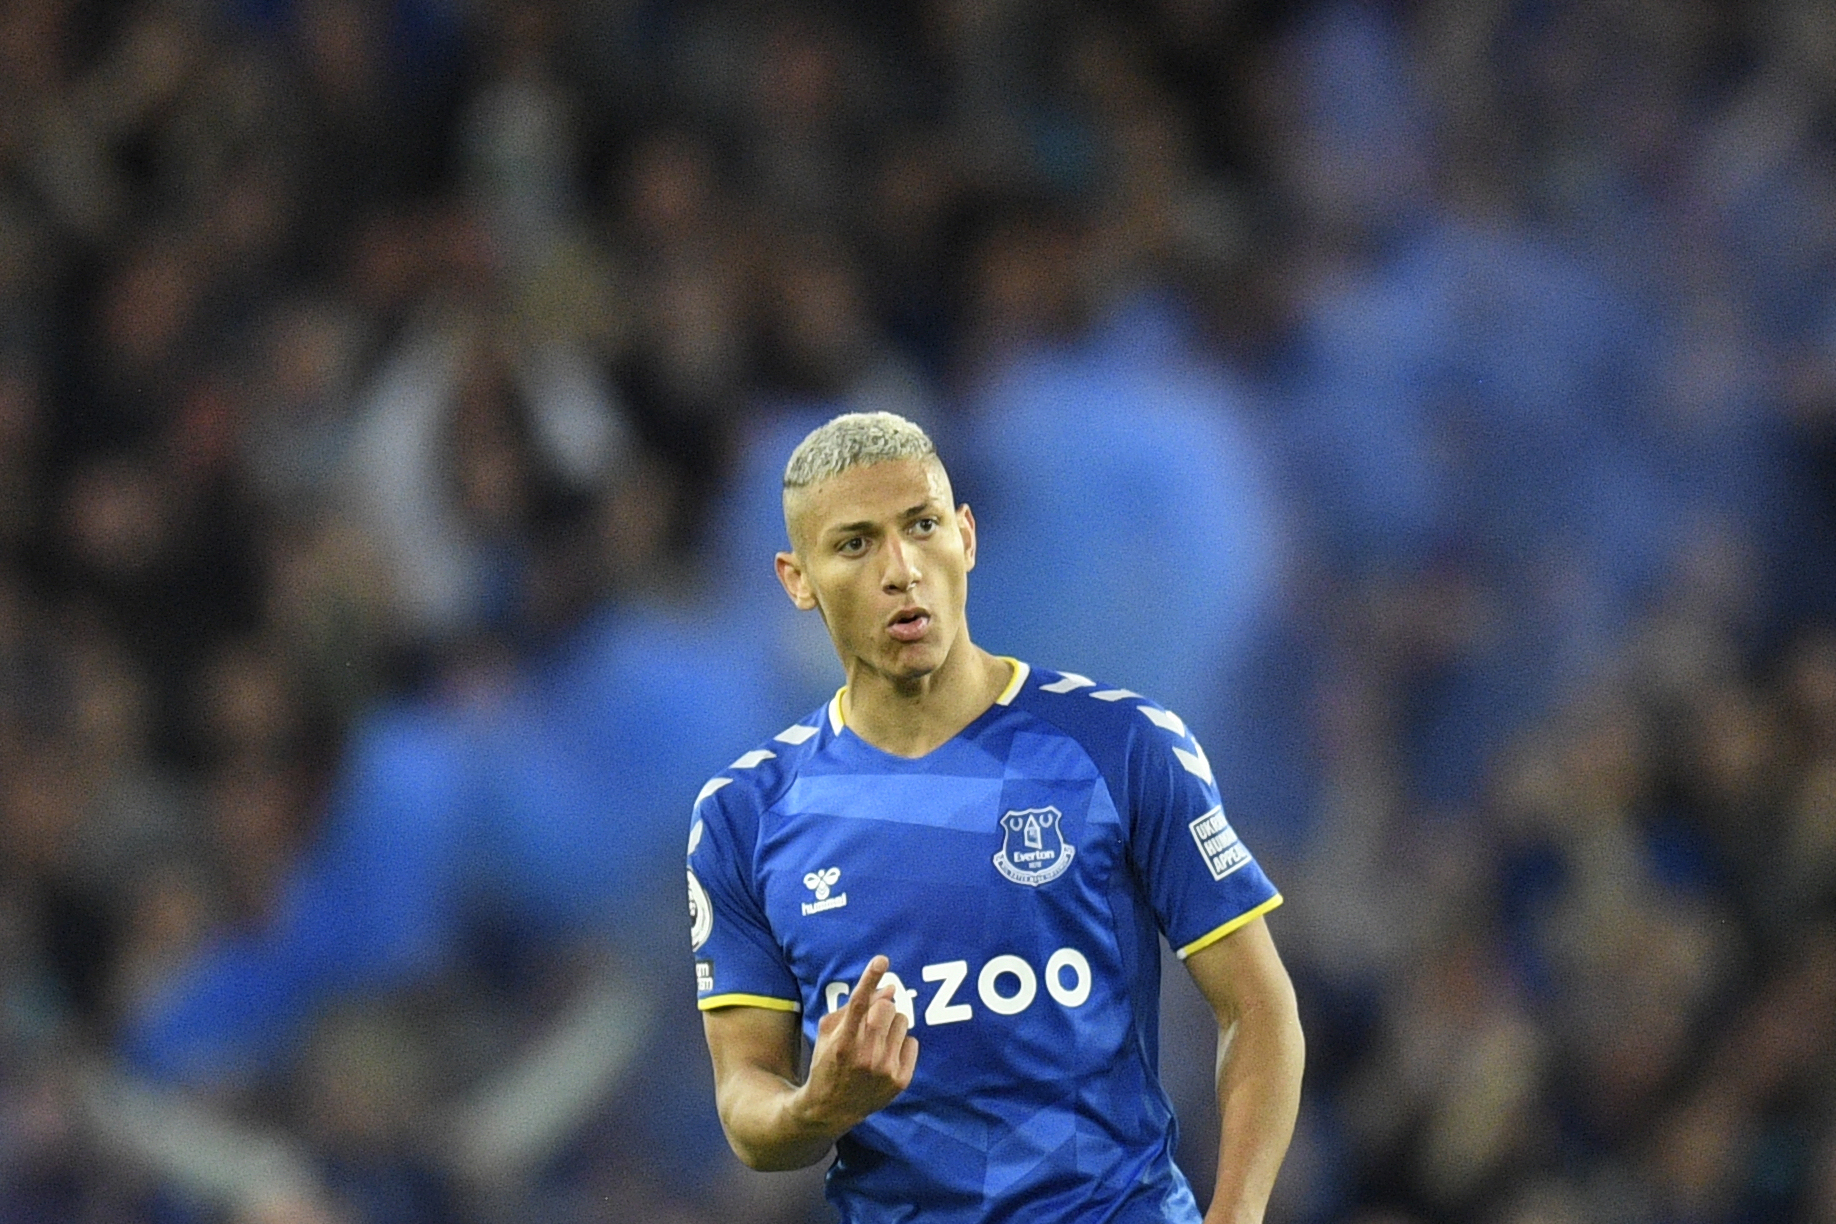 Richarlison during his time at Everton before joining Tottenham Hotspur in the summer of 2022.